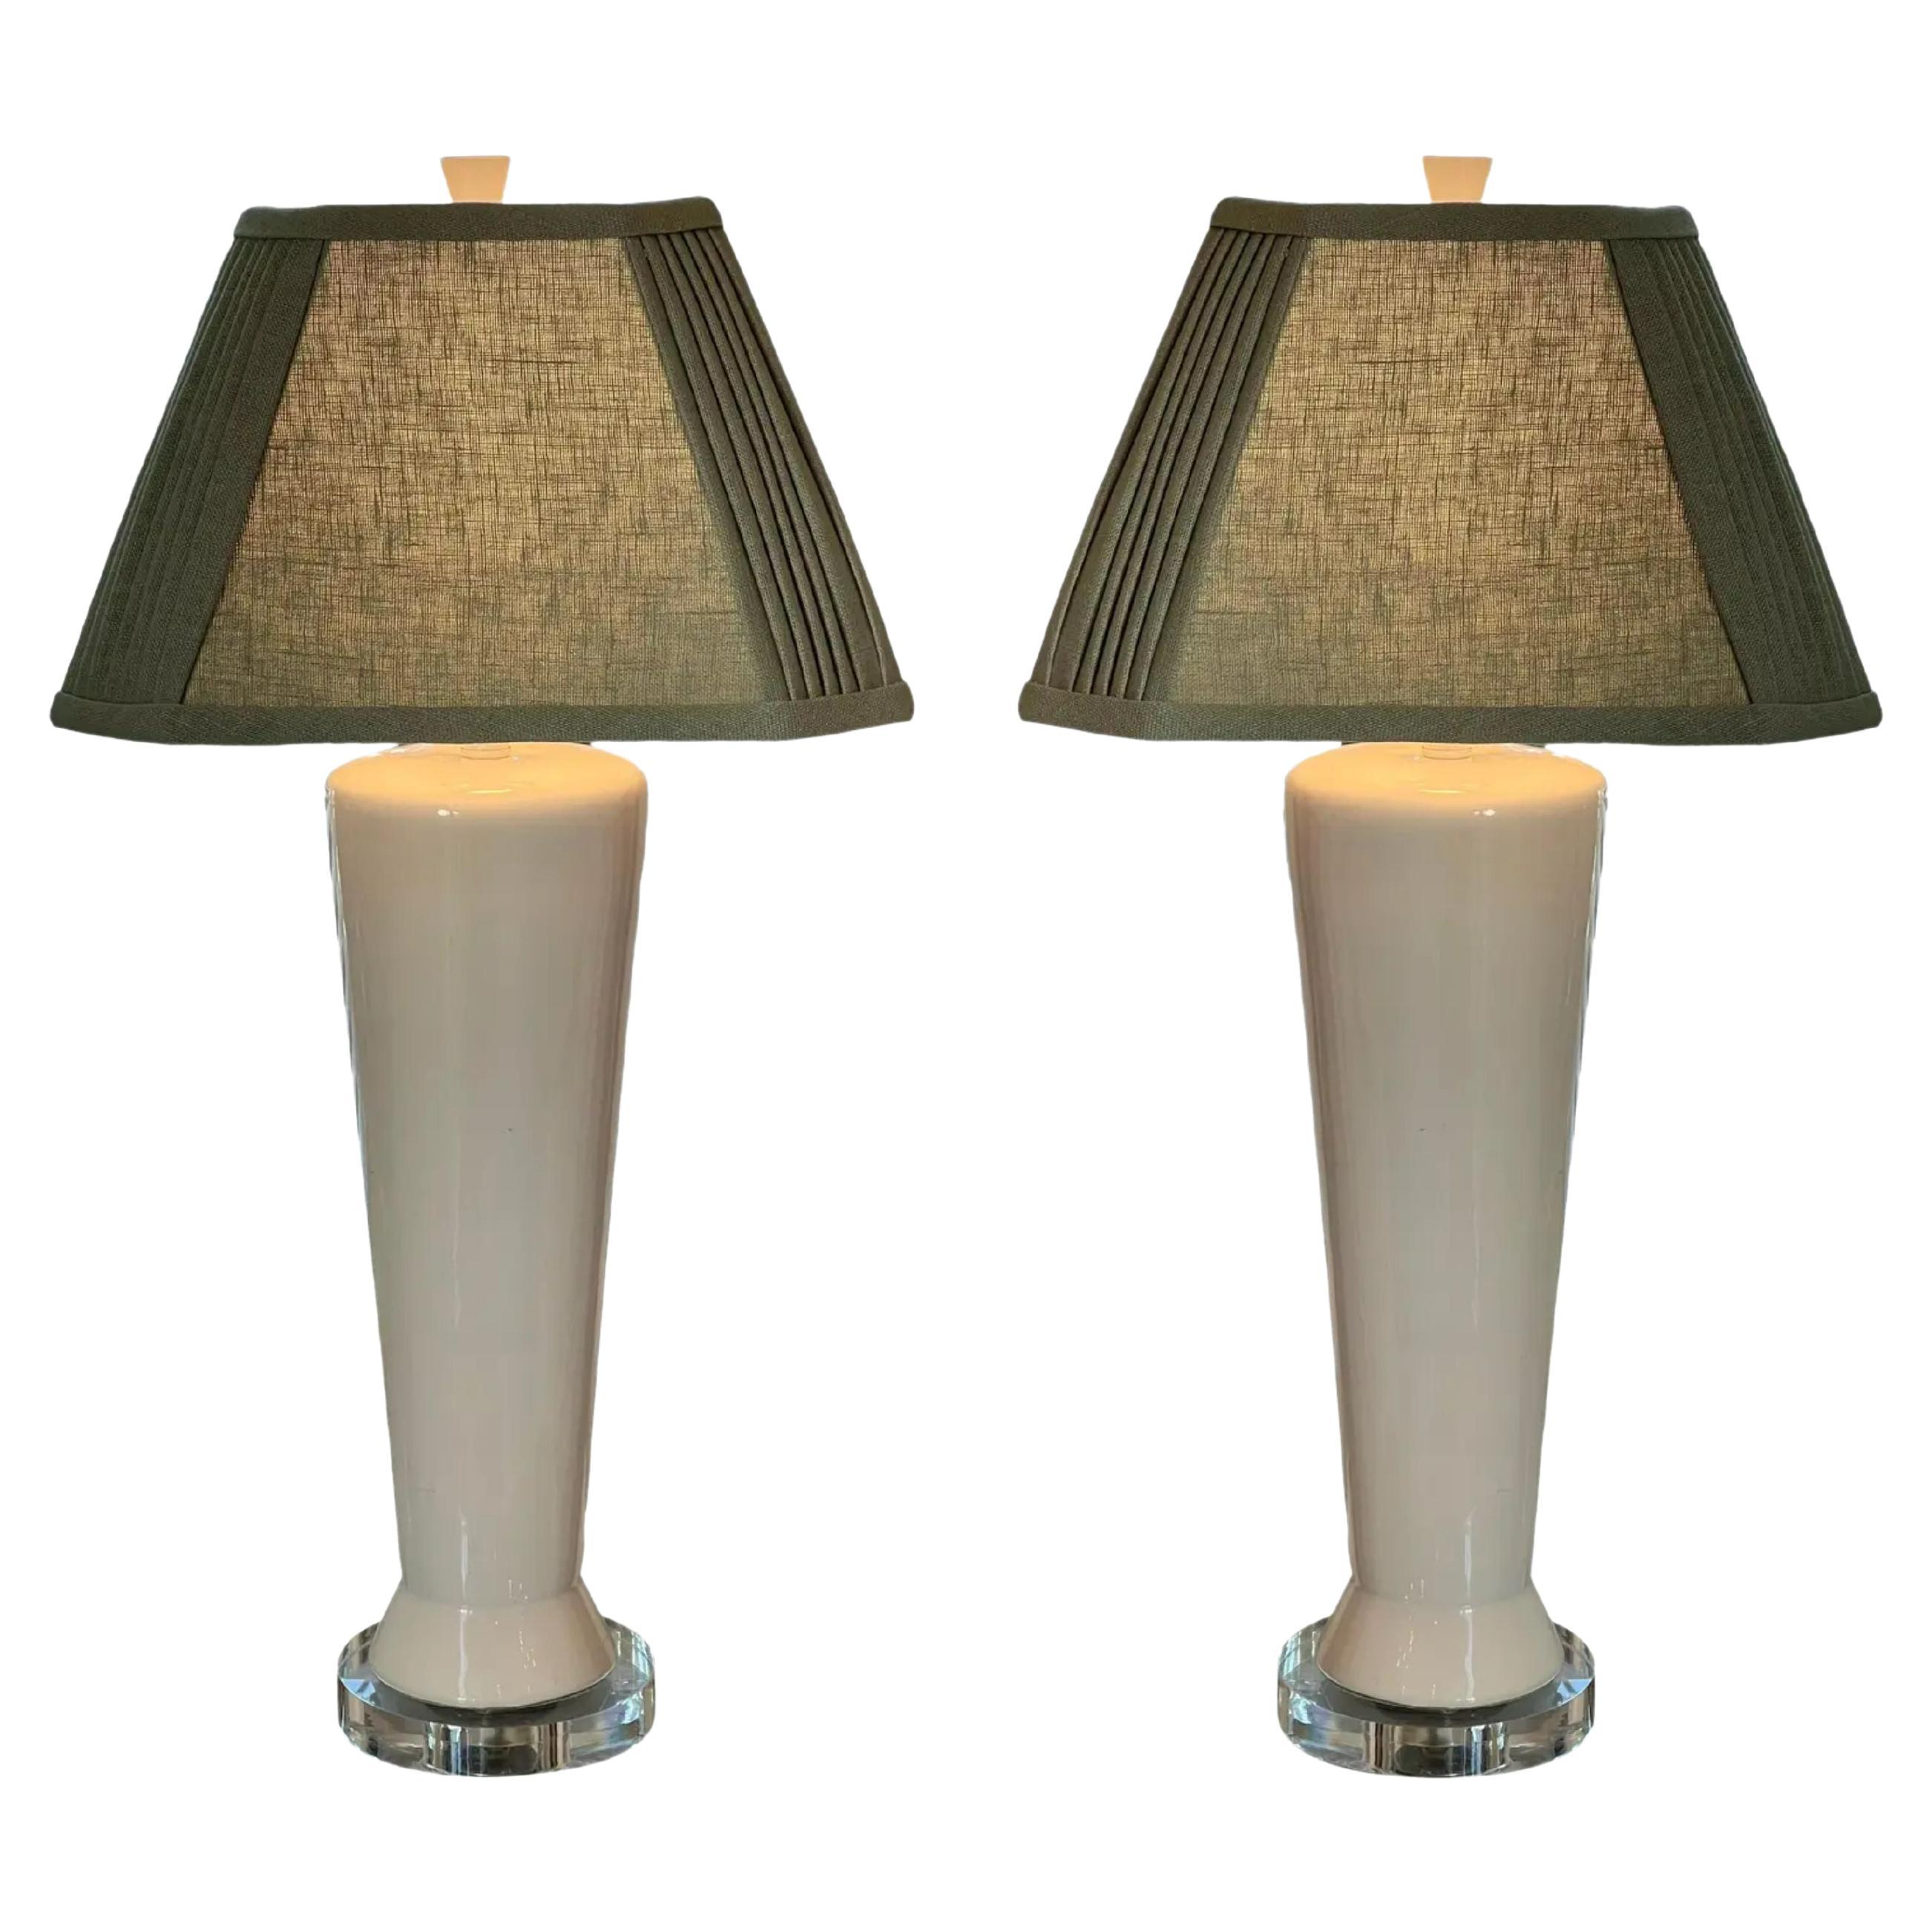 Pair of White Pottery Table Lamps with Custom Made Linen Shades, 1960's For Sale